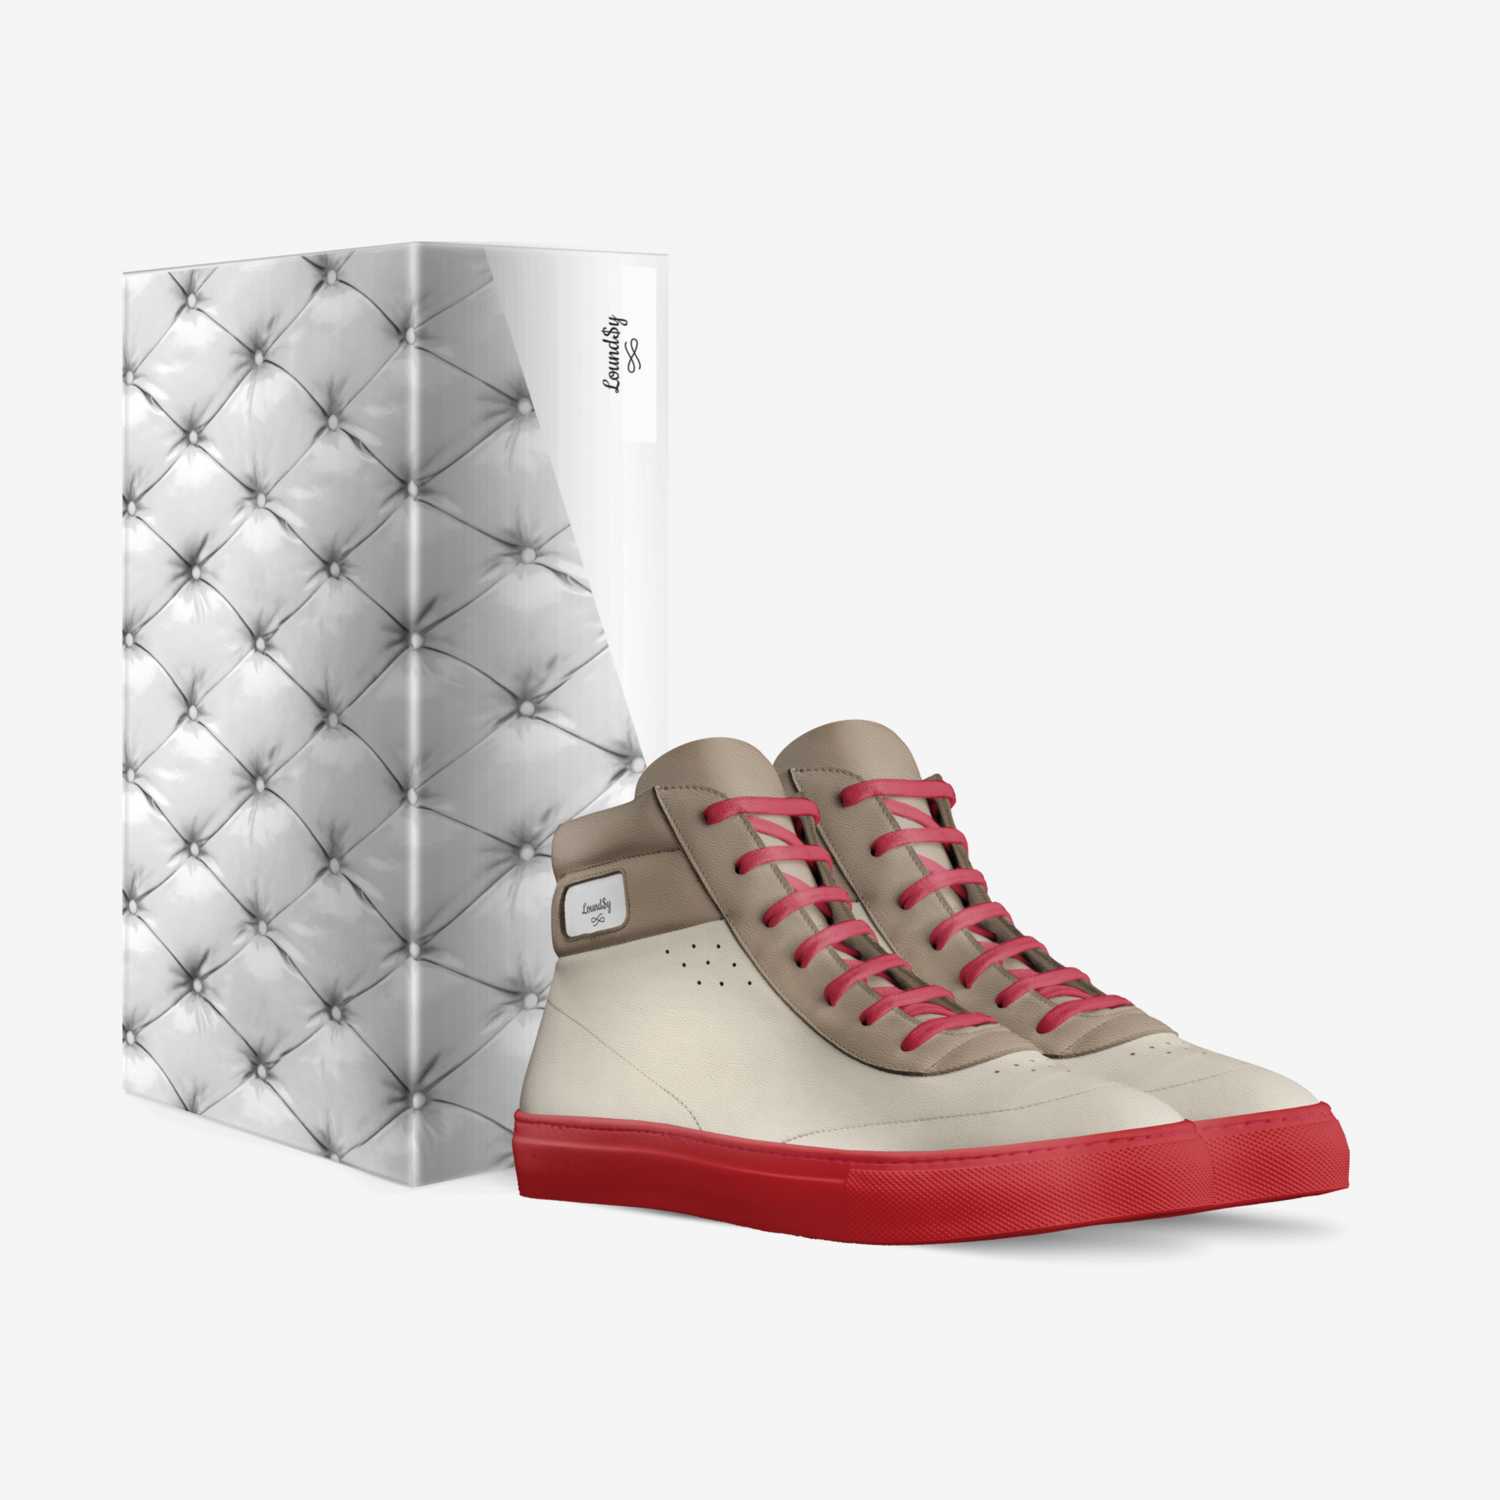 Lound$y custom made in Italy shoes by Daryl Lounds | Box view